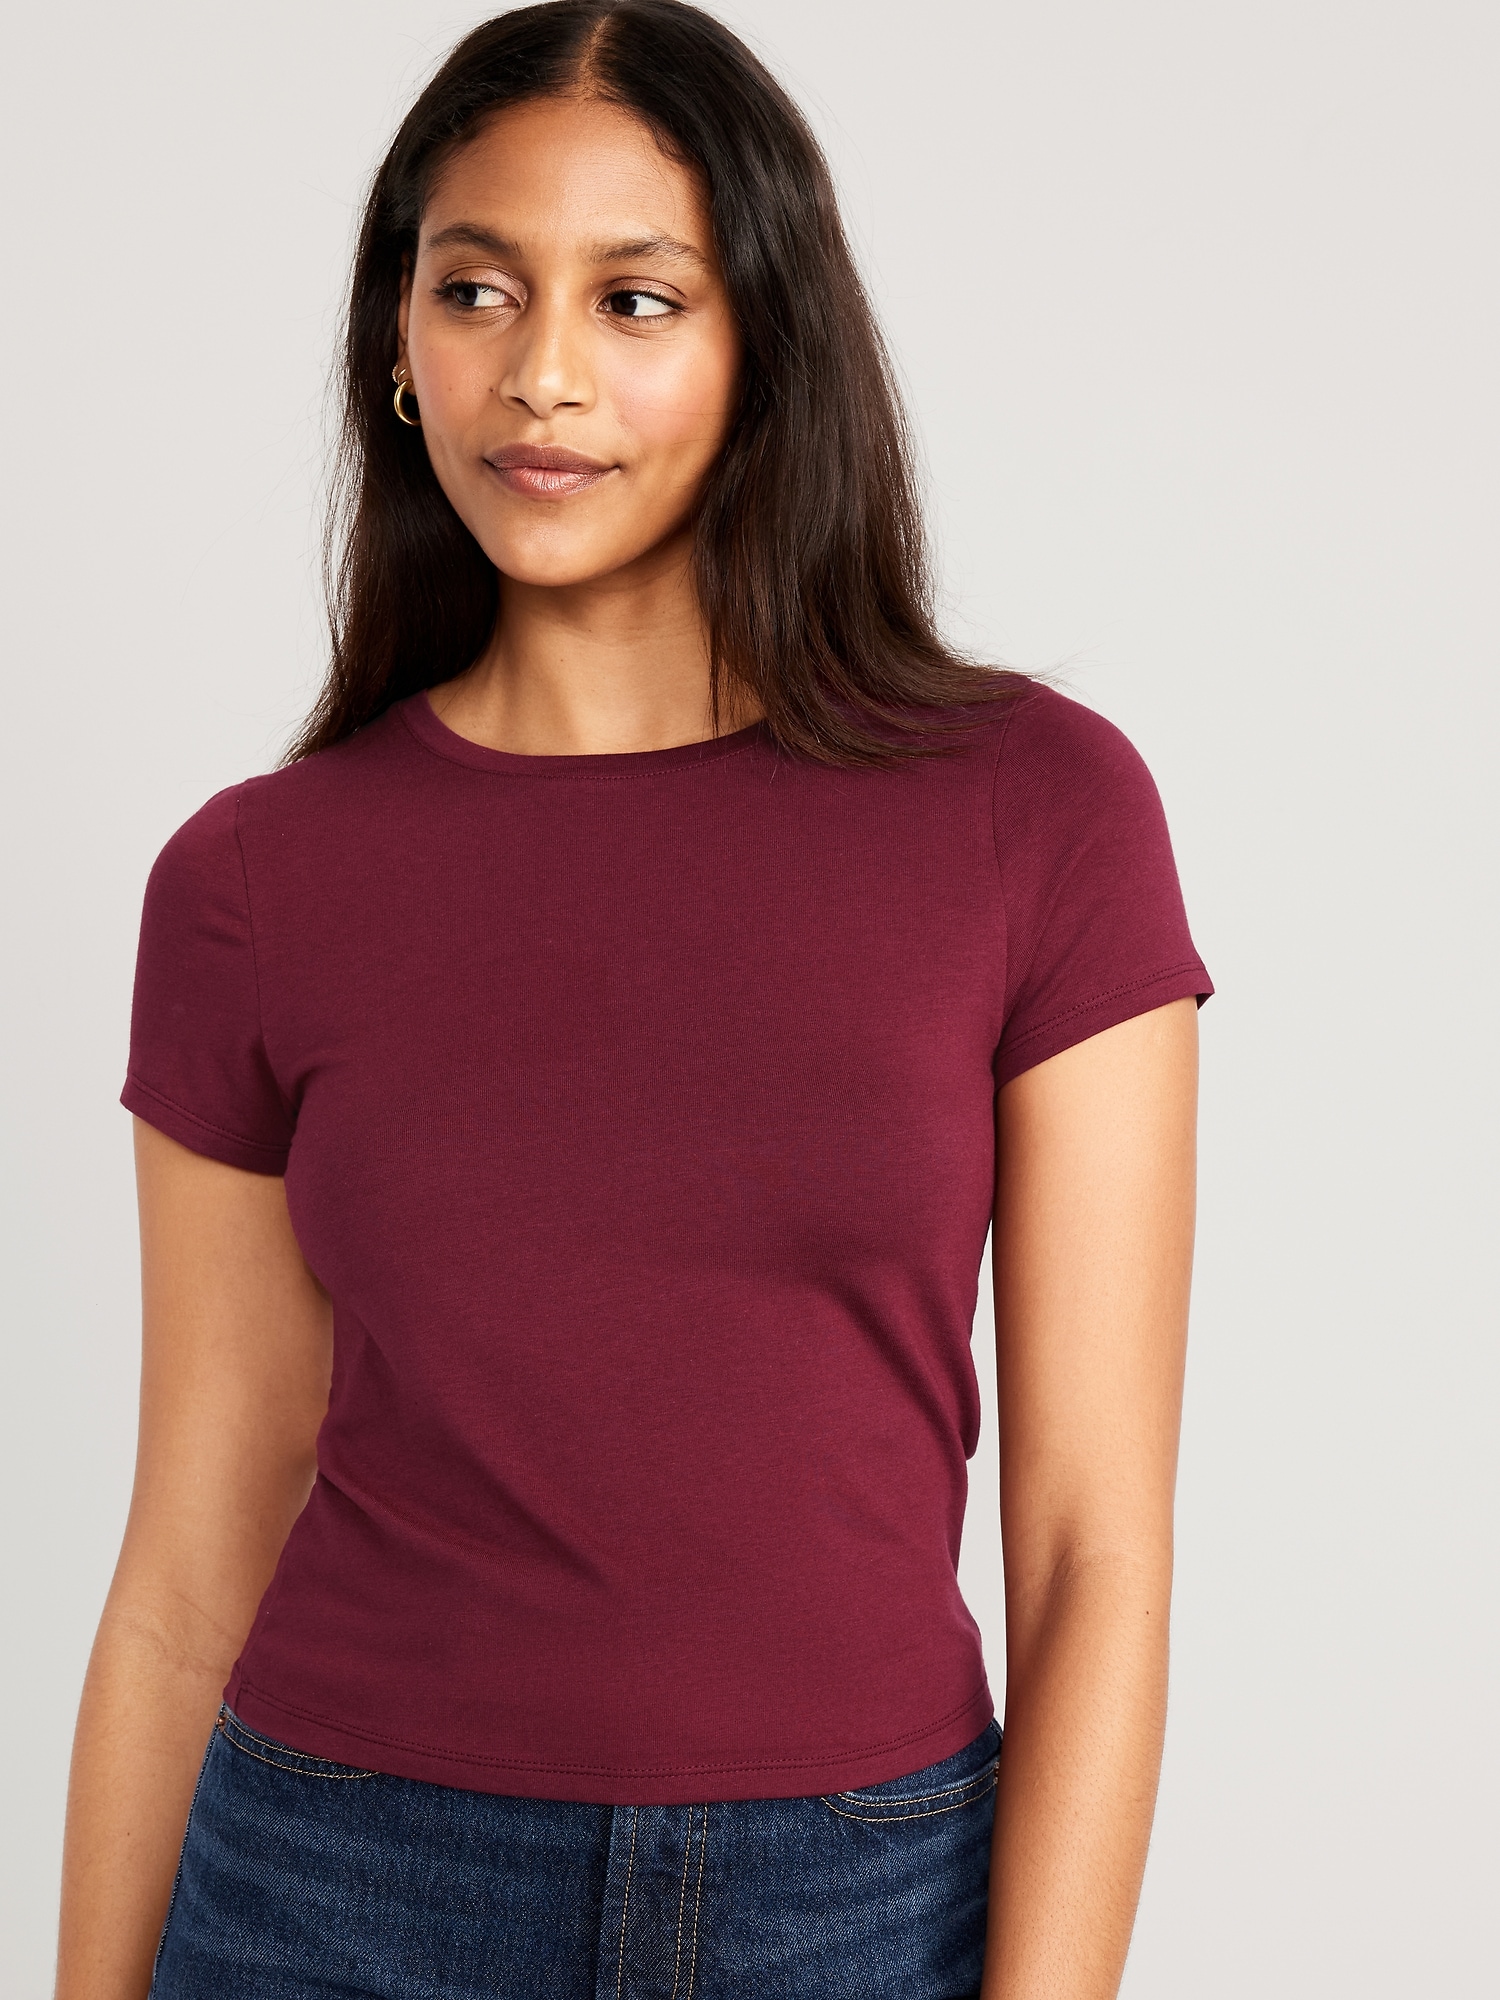 Bestee Cropped Crew-Neck T-Shirt | Old Navy